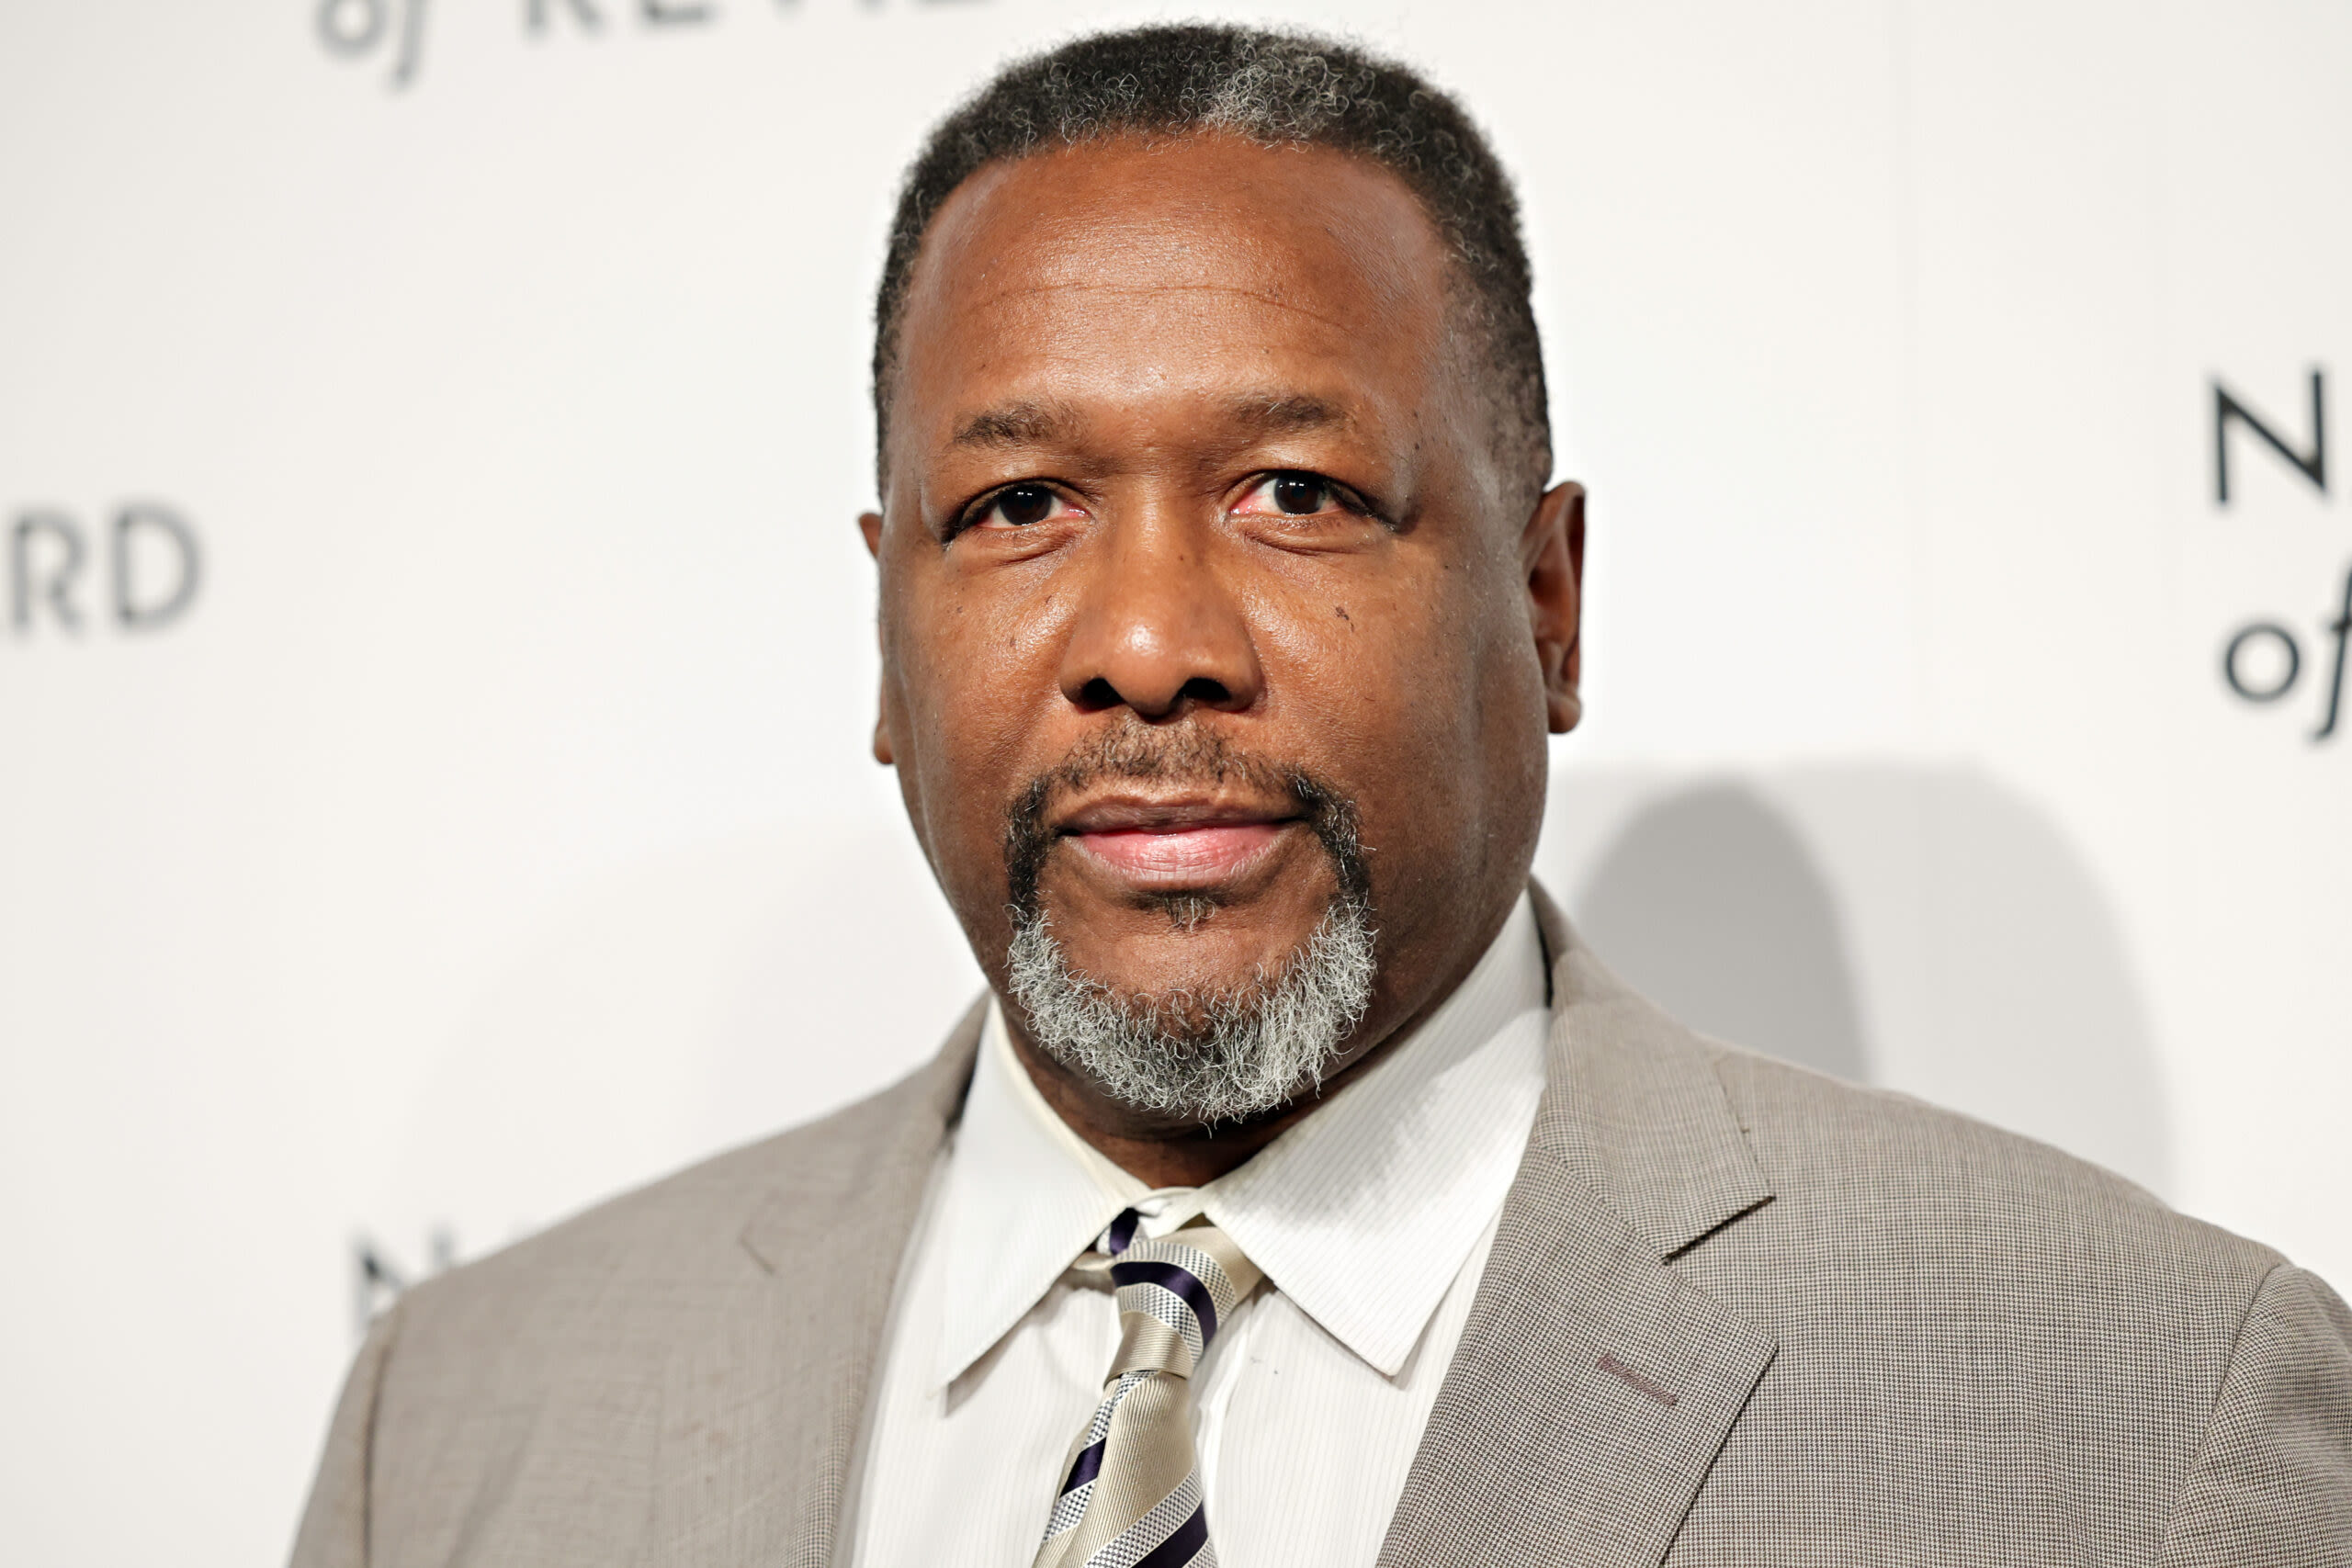 Wendell Pierce Reveals A White Landlord Rejected His Rental Application For A Harlem Apartment, Speaks Out On Racism...